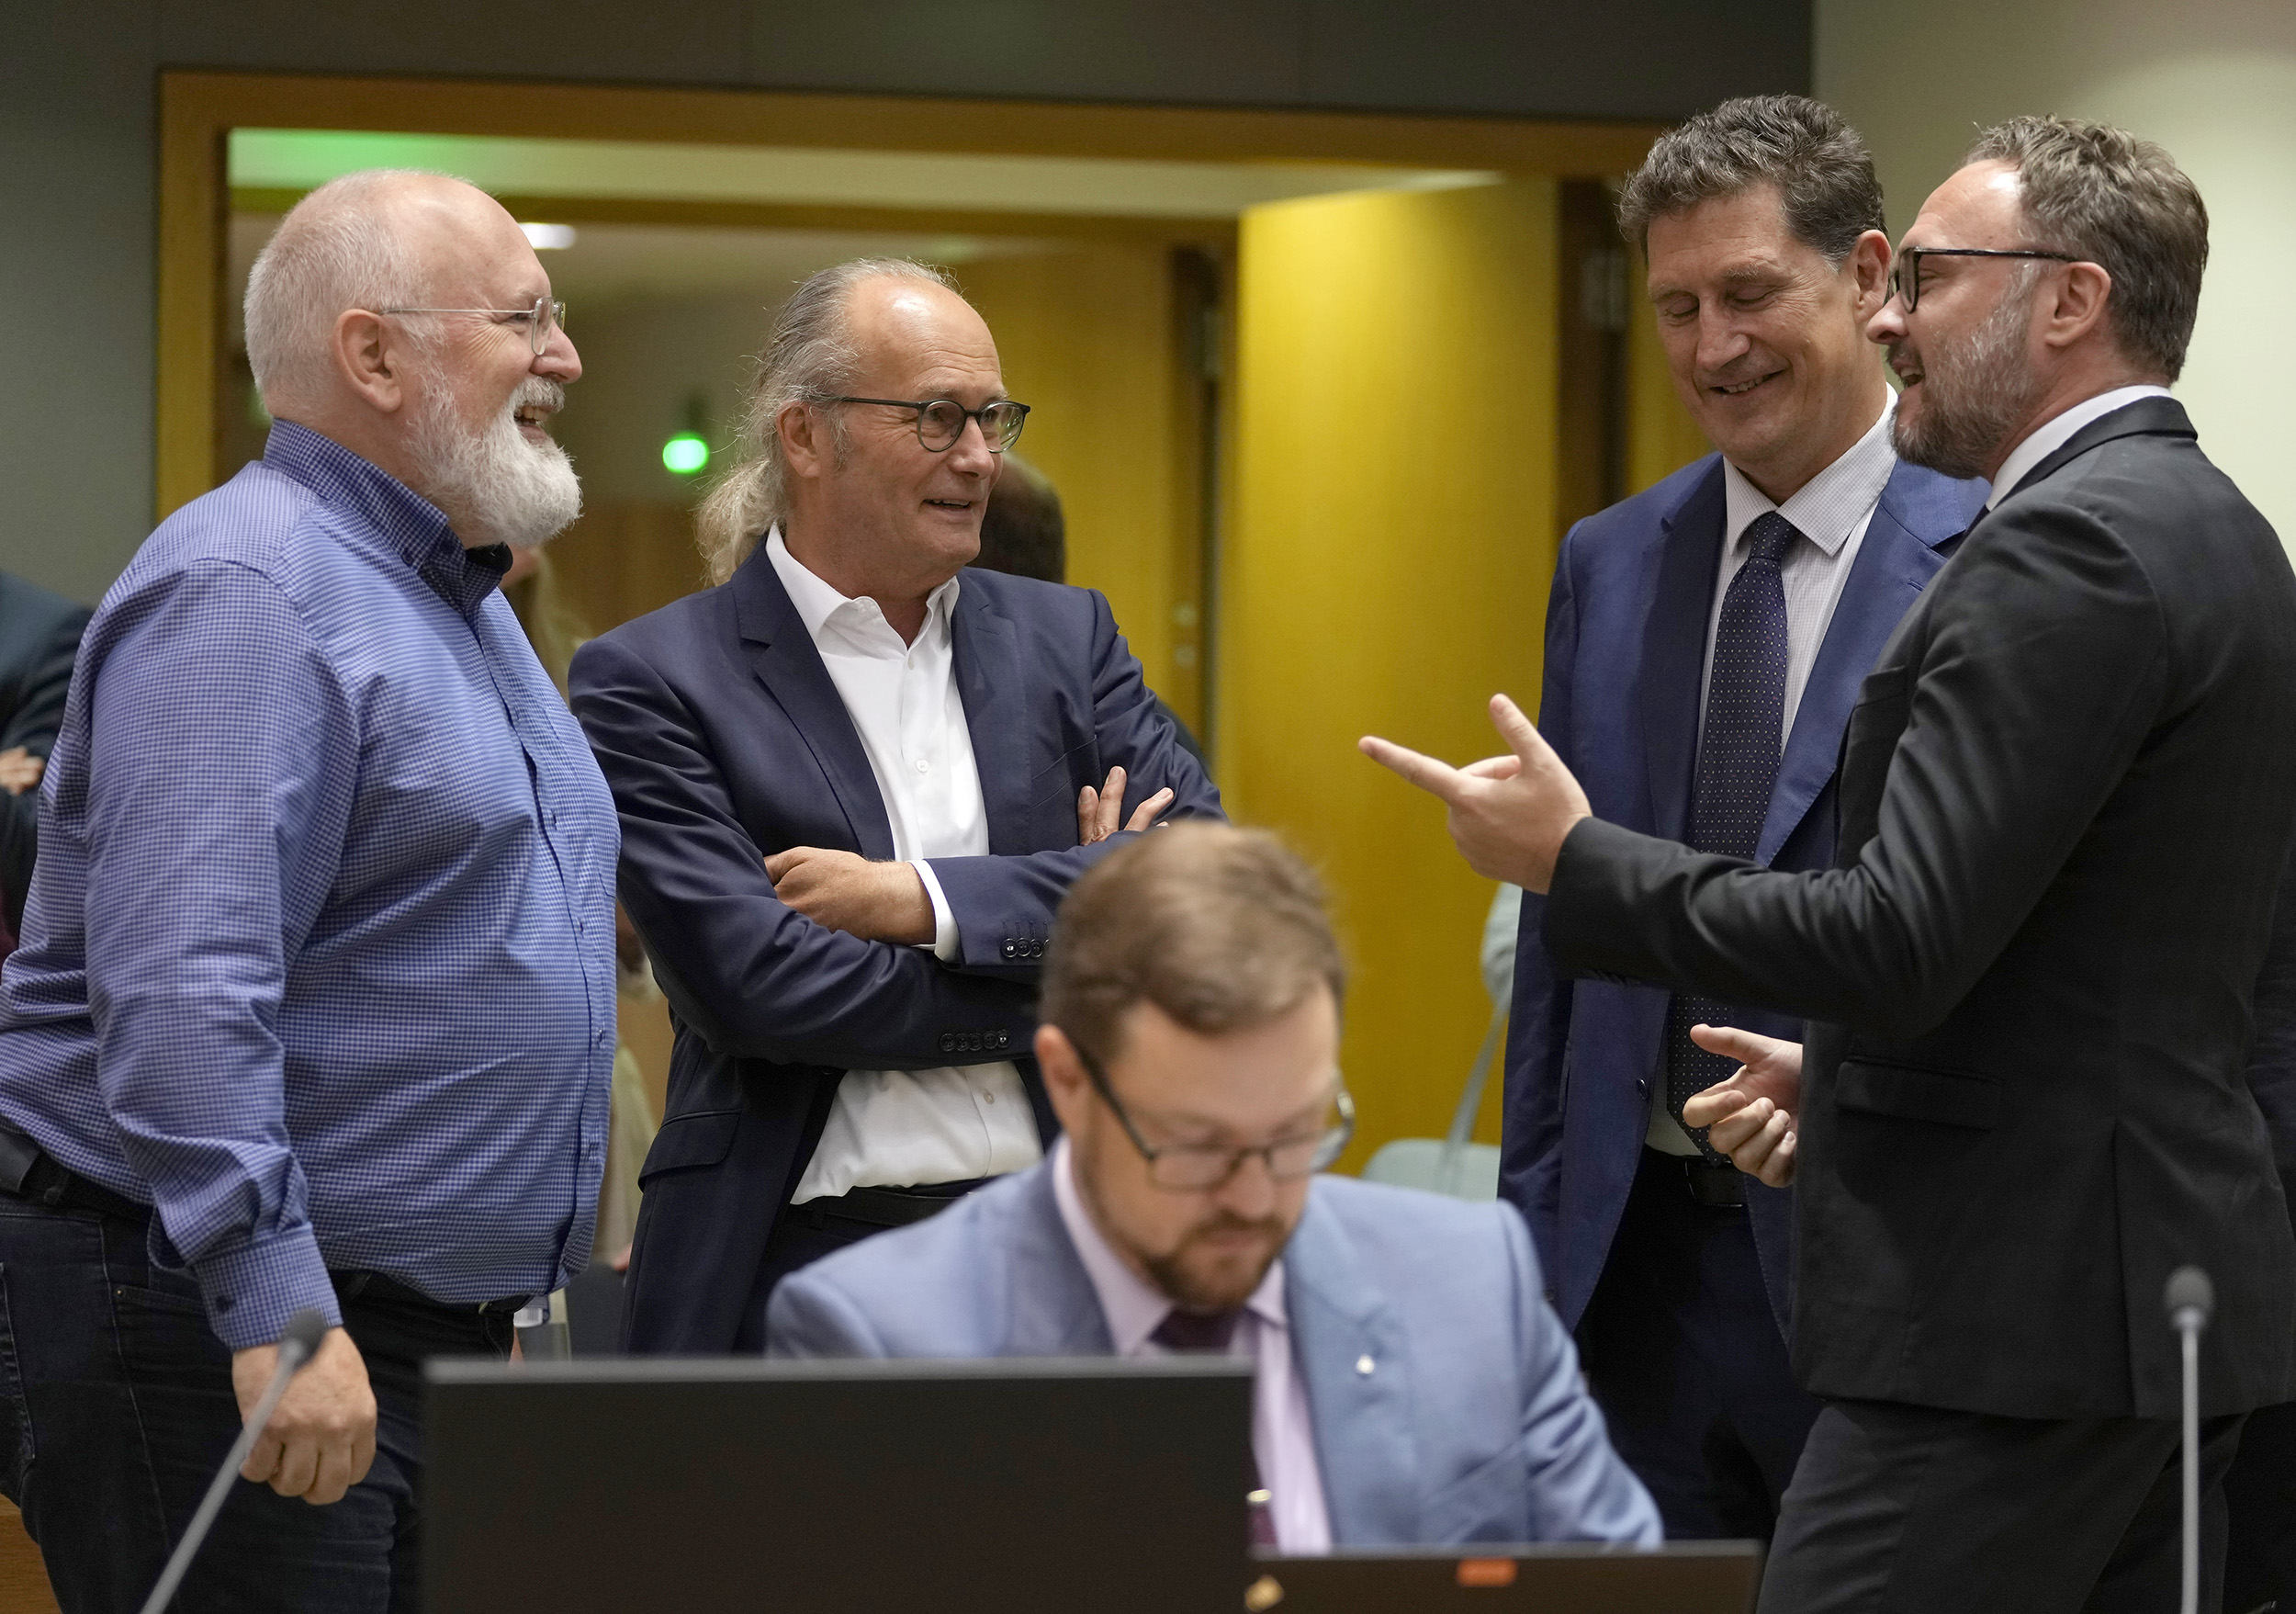 European Commissioner for European Green Deal Frans Timmermans, left, speaks with from left, Luxembourg's Energy Minister Claude Turmes, Ireland's Minister for the Environment Eamon Ryan and Denmark's Minister for Climate Dan Jorgensen during an emergency meeting of EU energy ministers in Brussels, Belgium, on July 26.